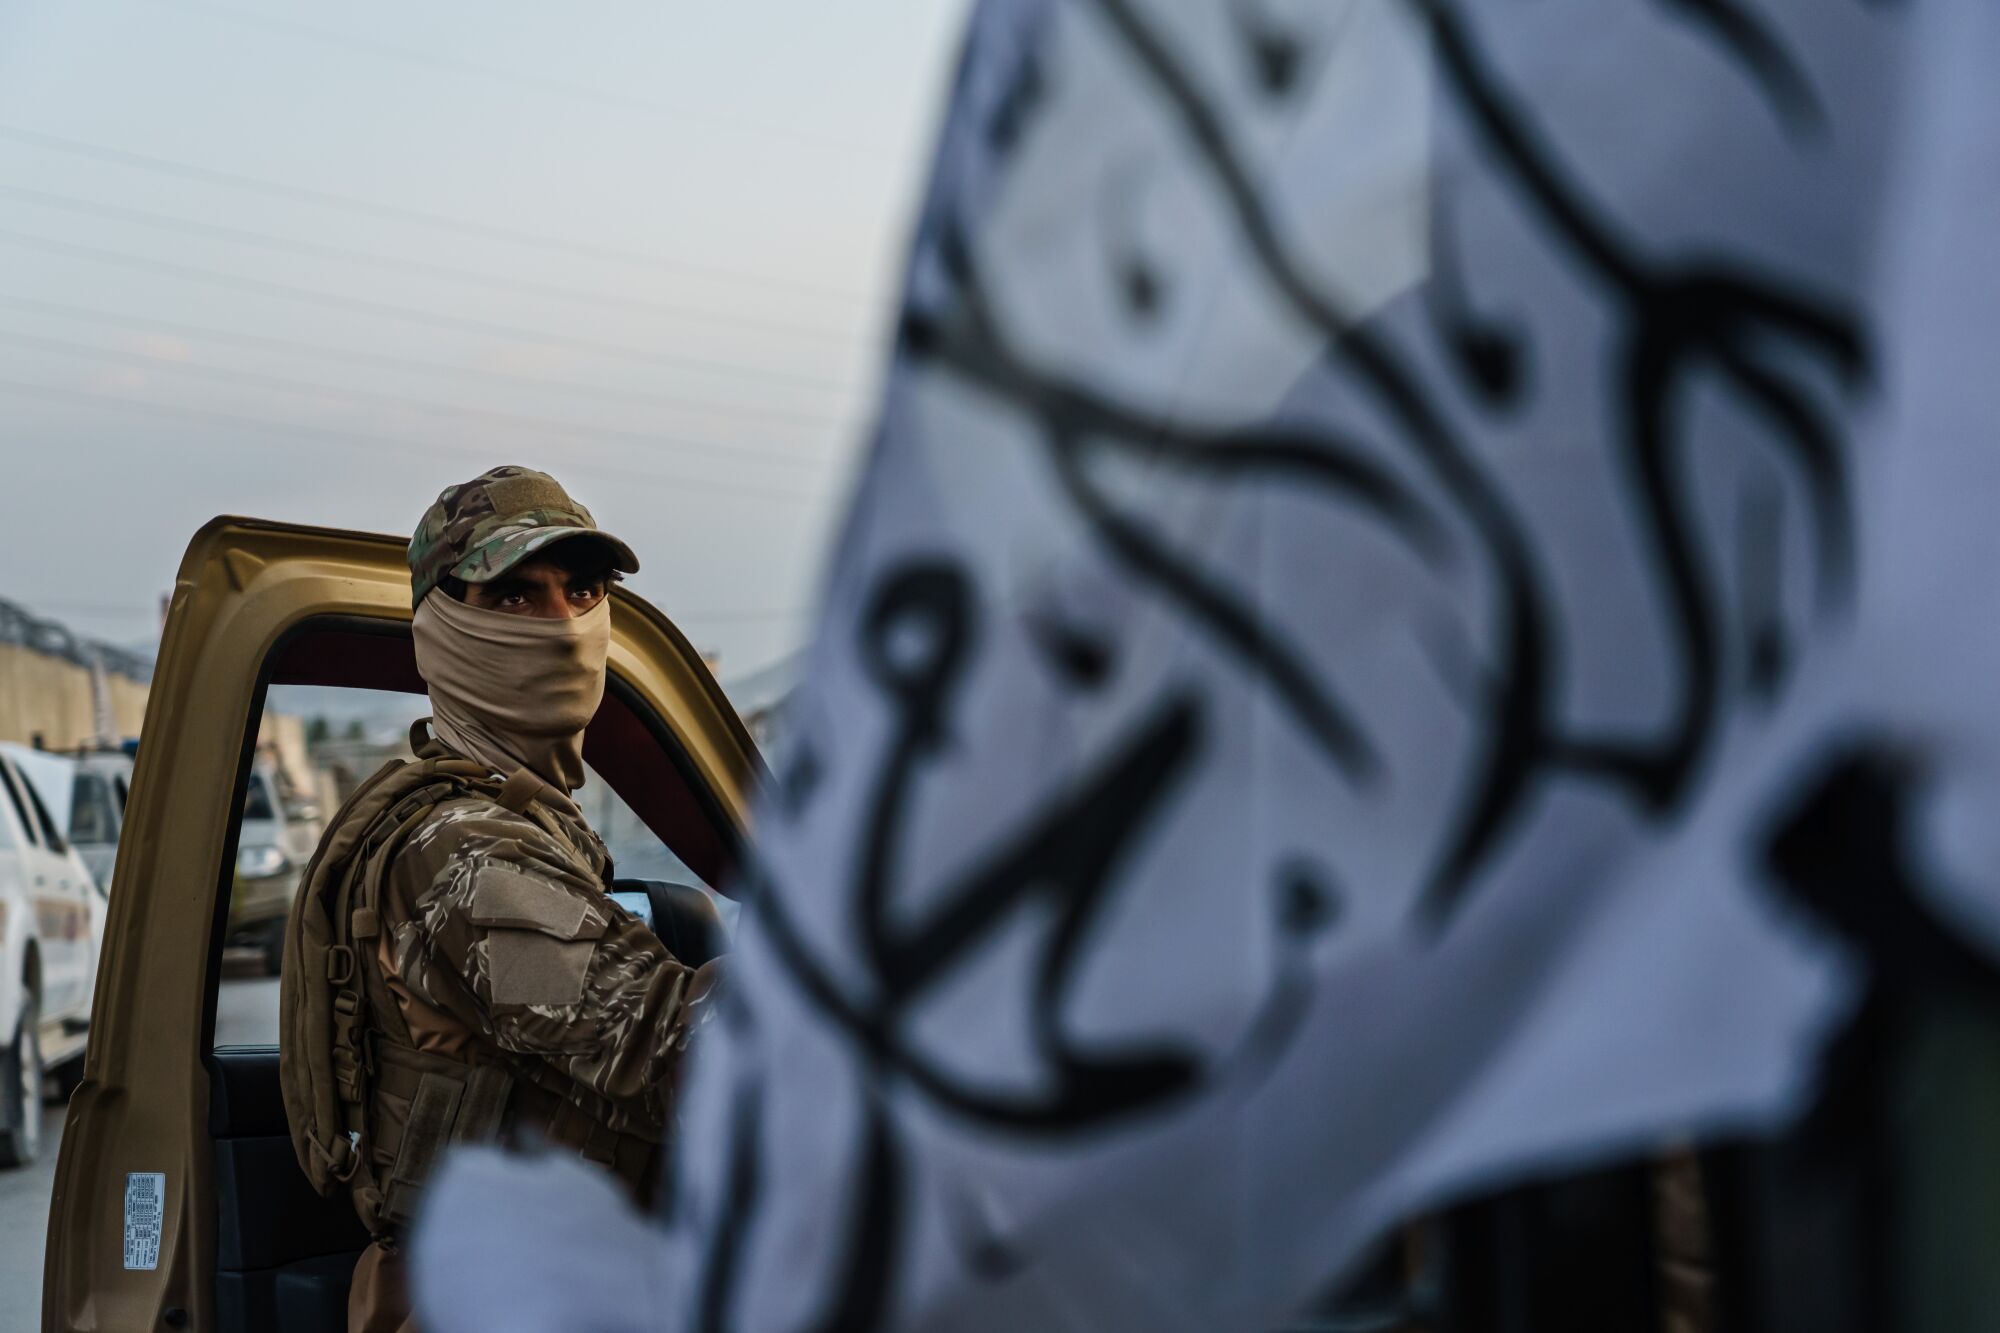 A Taliban fighter appears in the open door of a vehicle next to a white Taliban flag